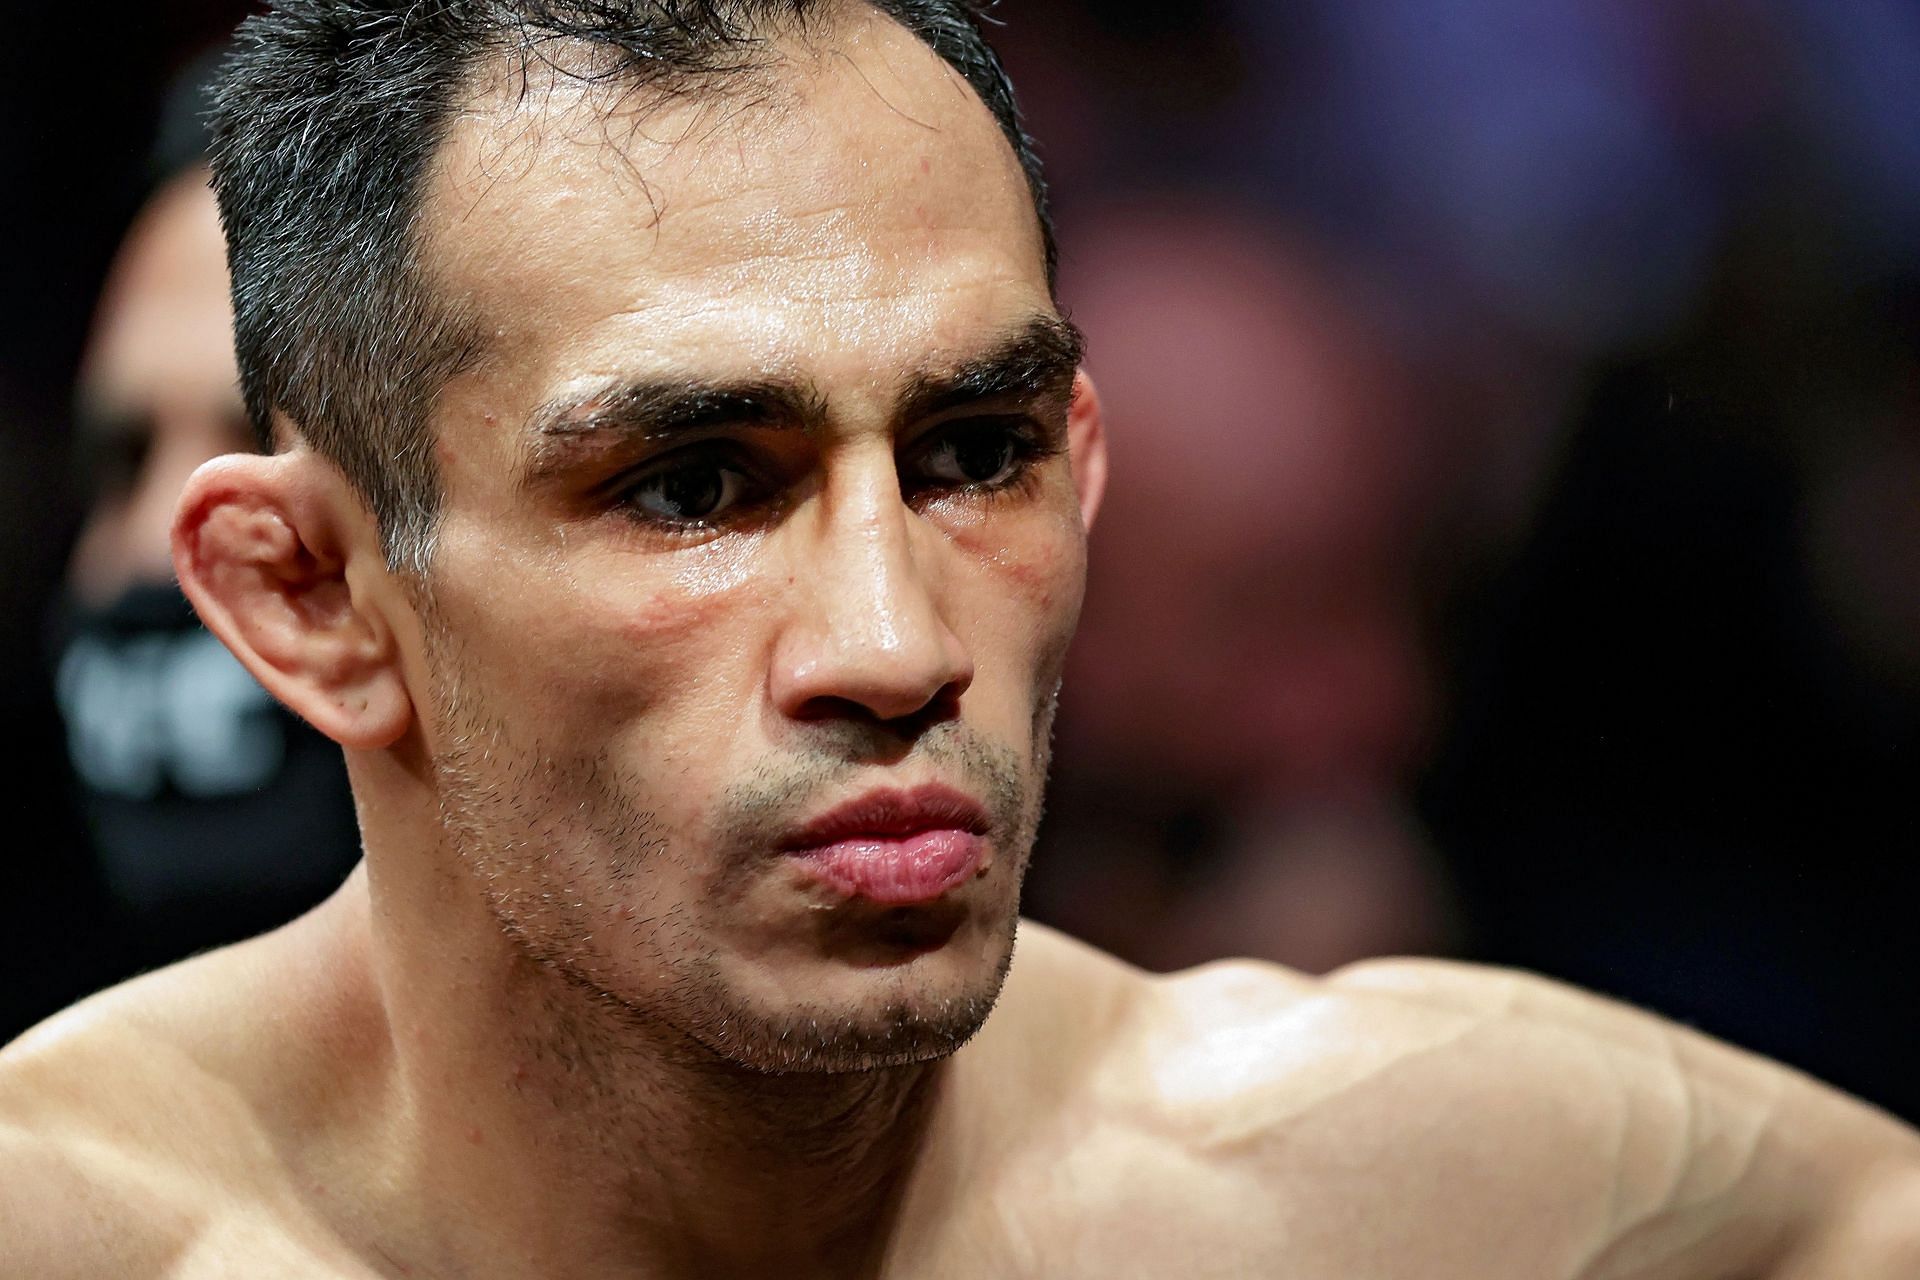 Tony Ferguson would make for a credible yet beatable opponent for Gamrot